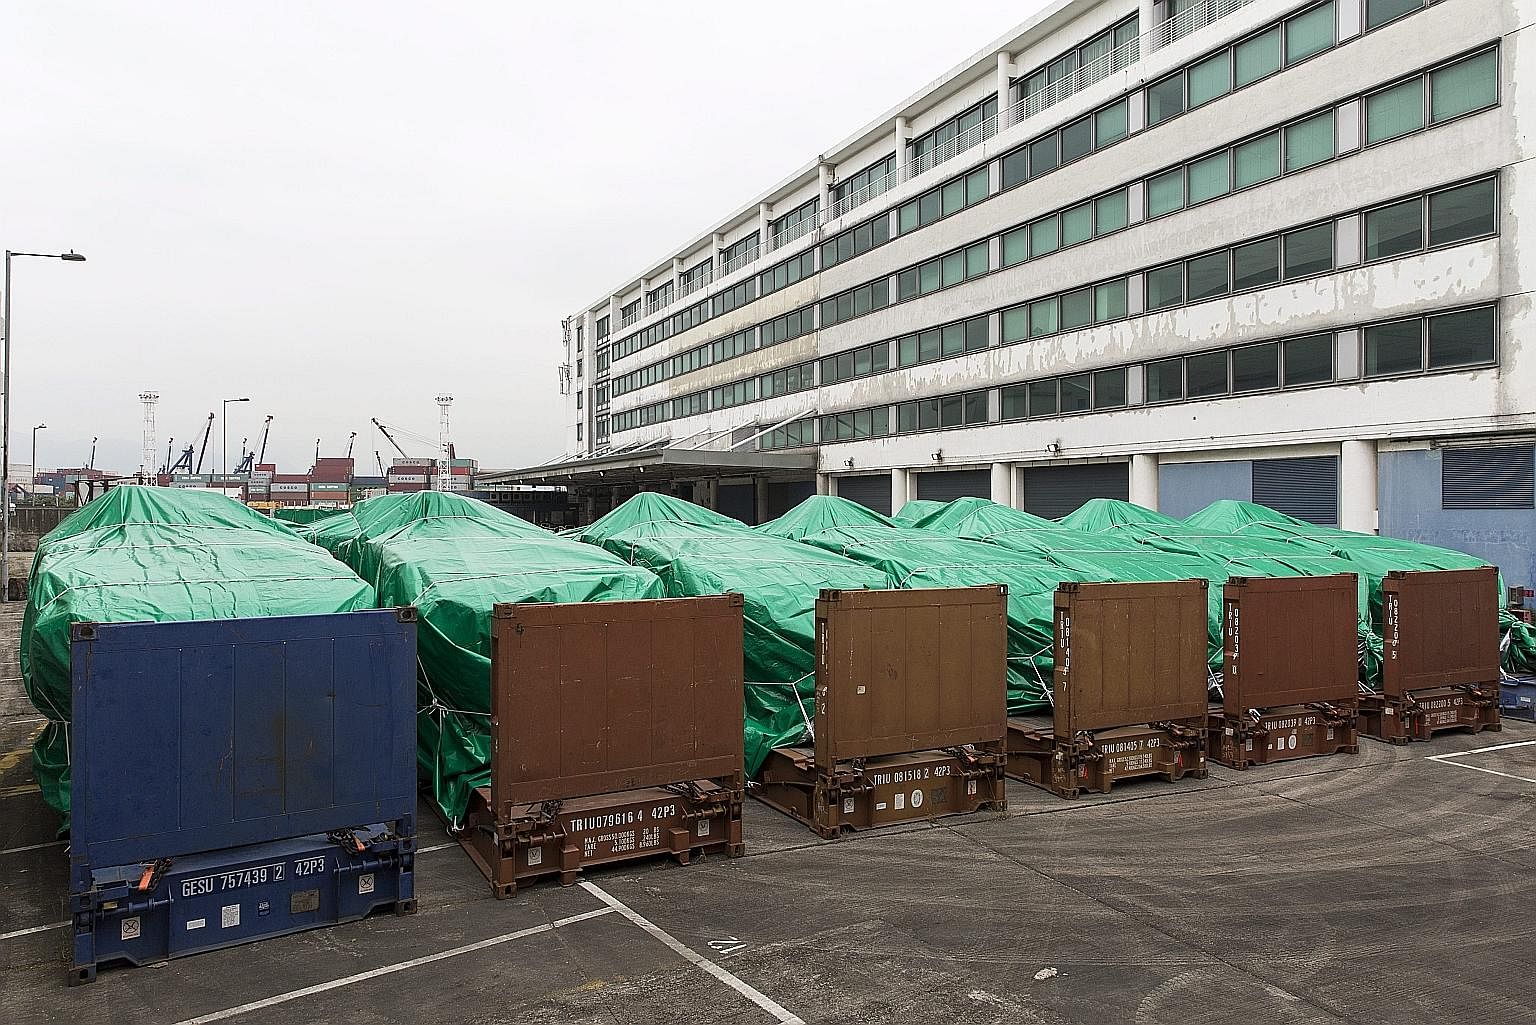 Singapore's armoured vehicles covered with tarpaulin at a Hong Kong Customs and Excise facility in Tuen Mun. Not jumping to conclusions about China's intent over this Terrex episode is not an example of "vague idealism", but one based on the premise 